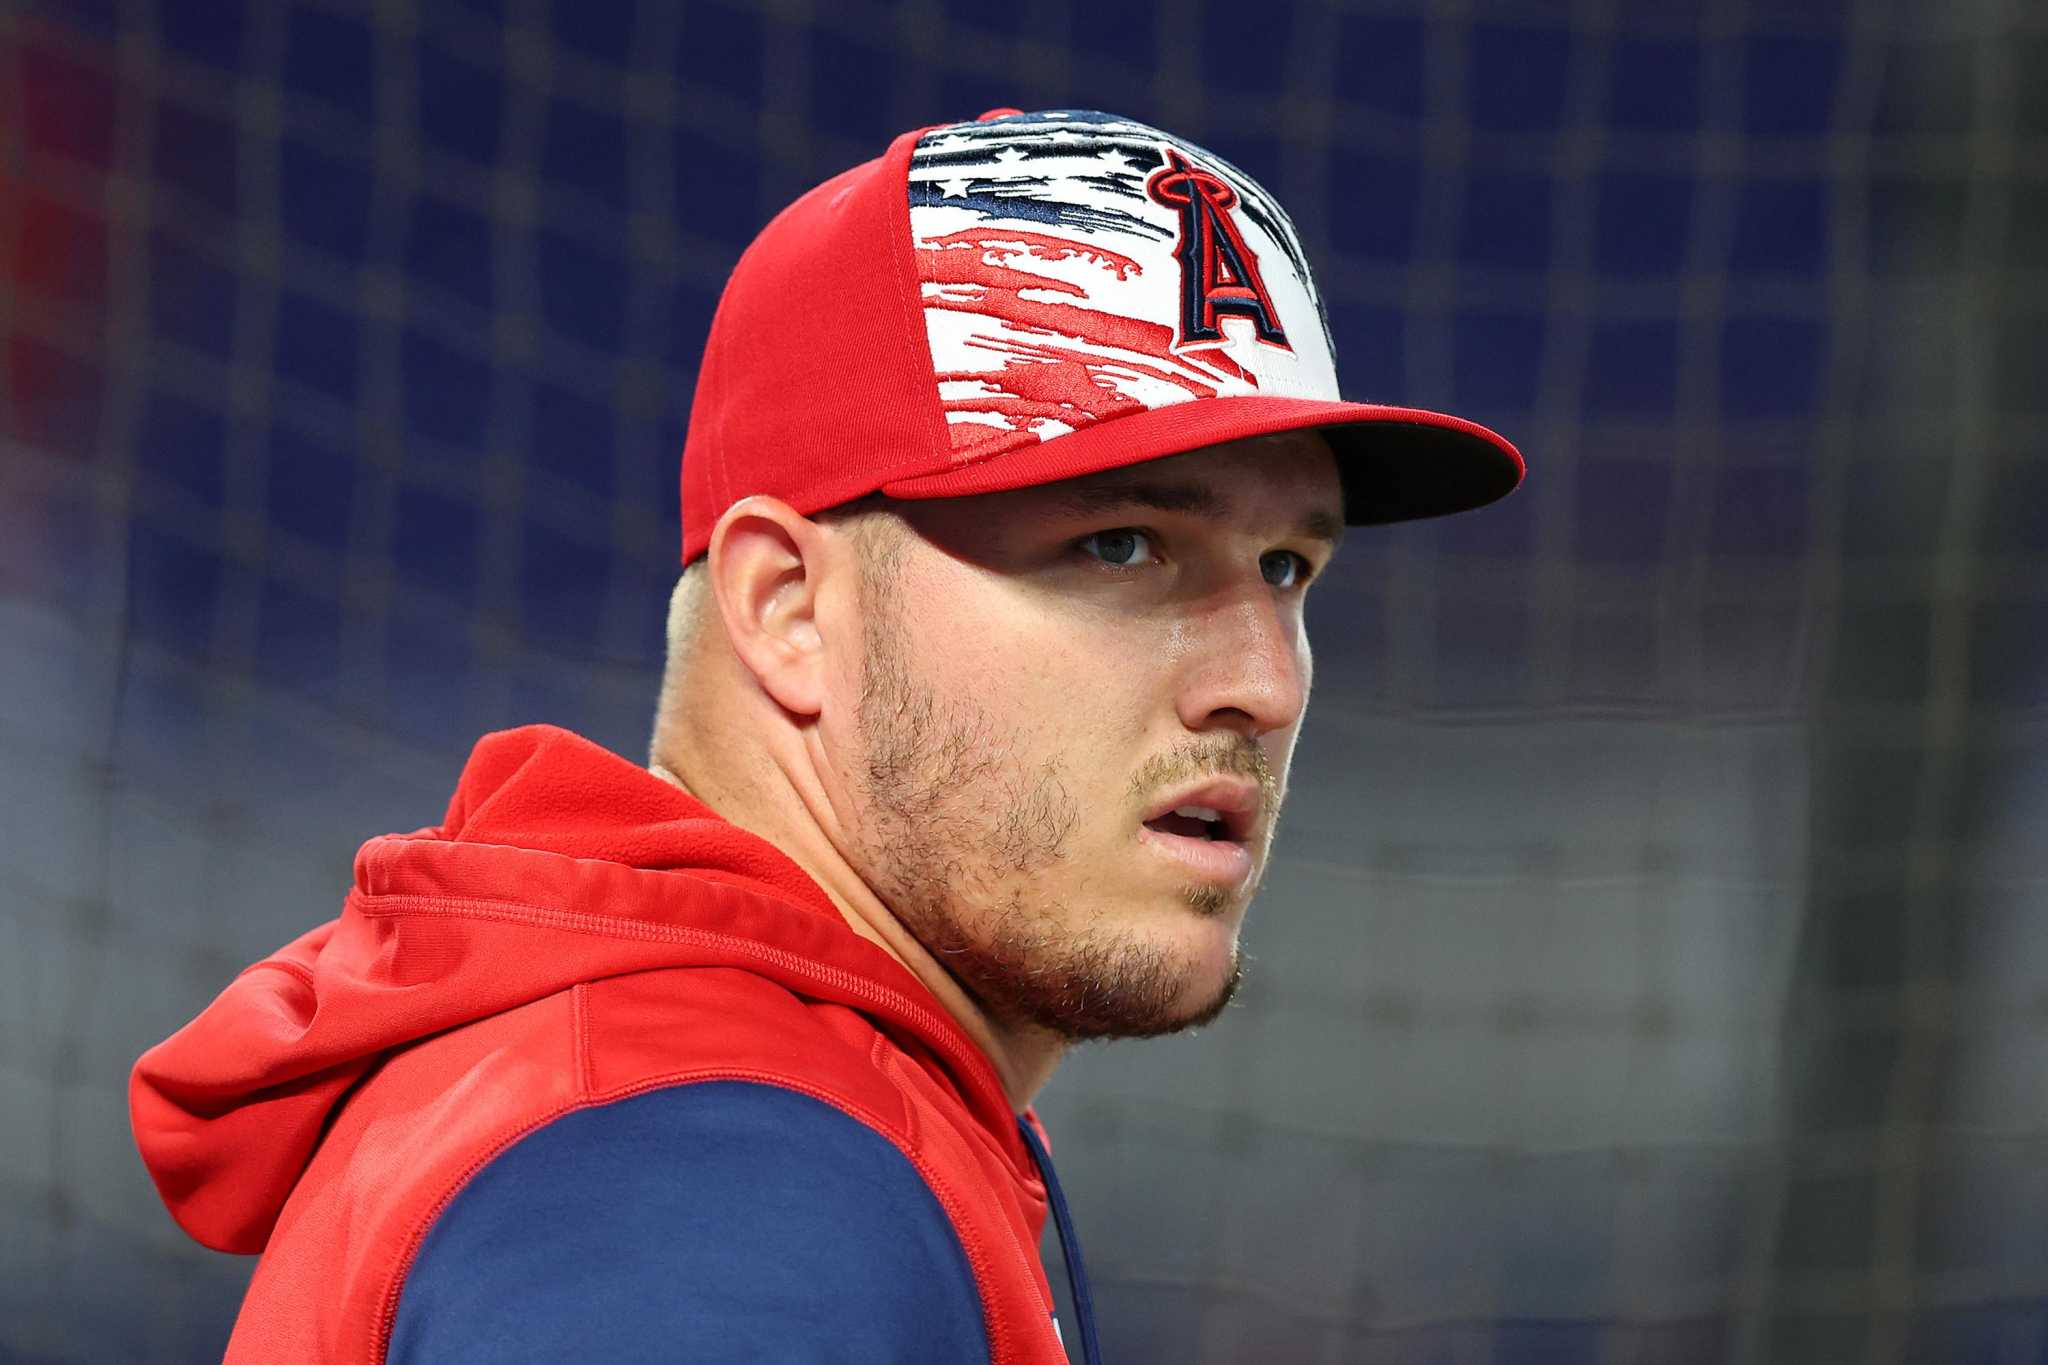 Mike Trout's 2023 season ends on injured list, raising concerns